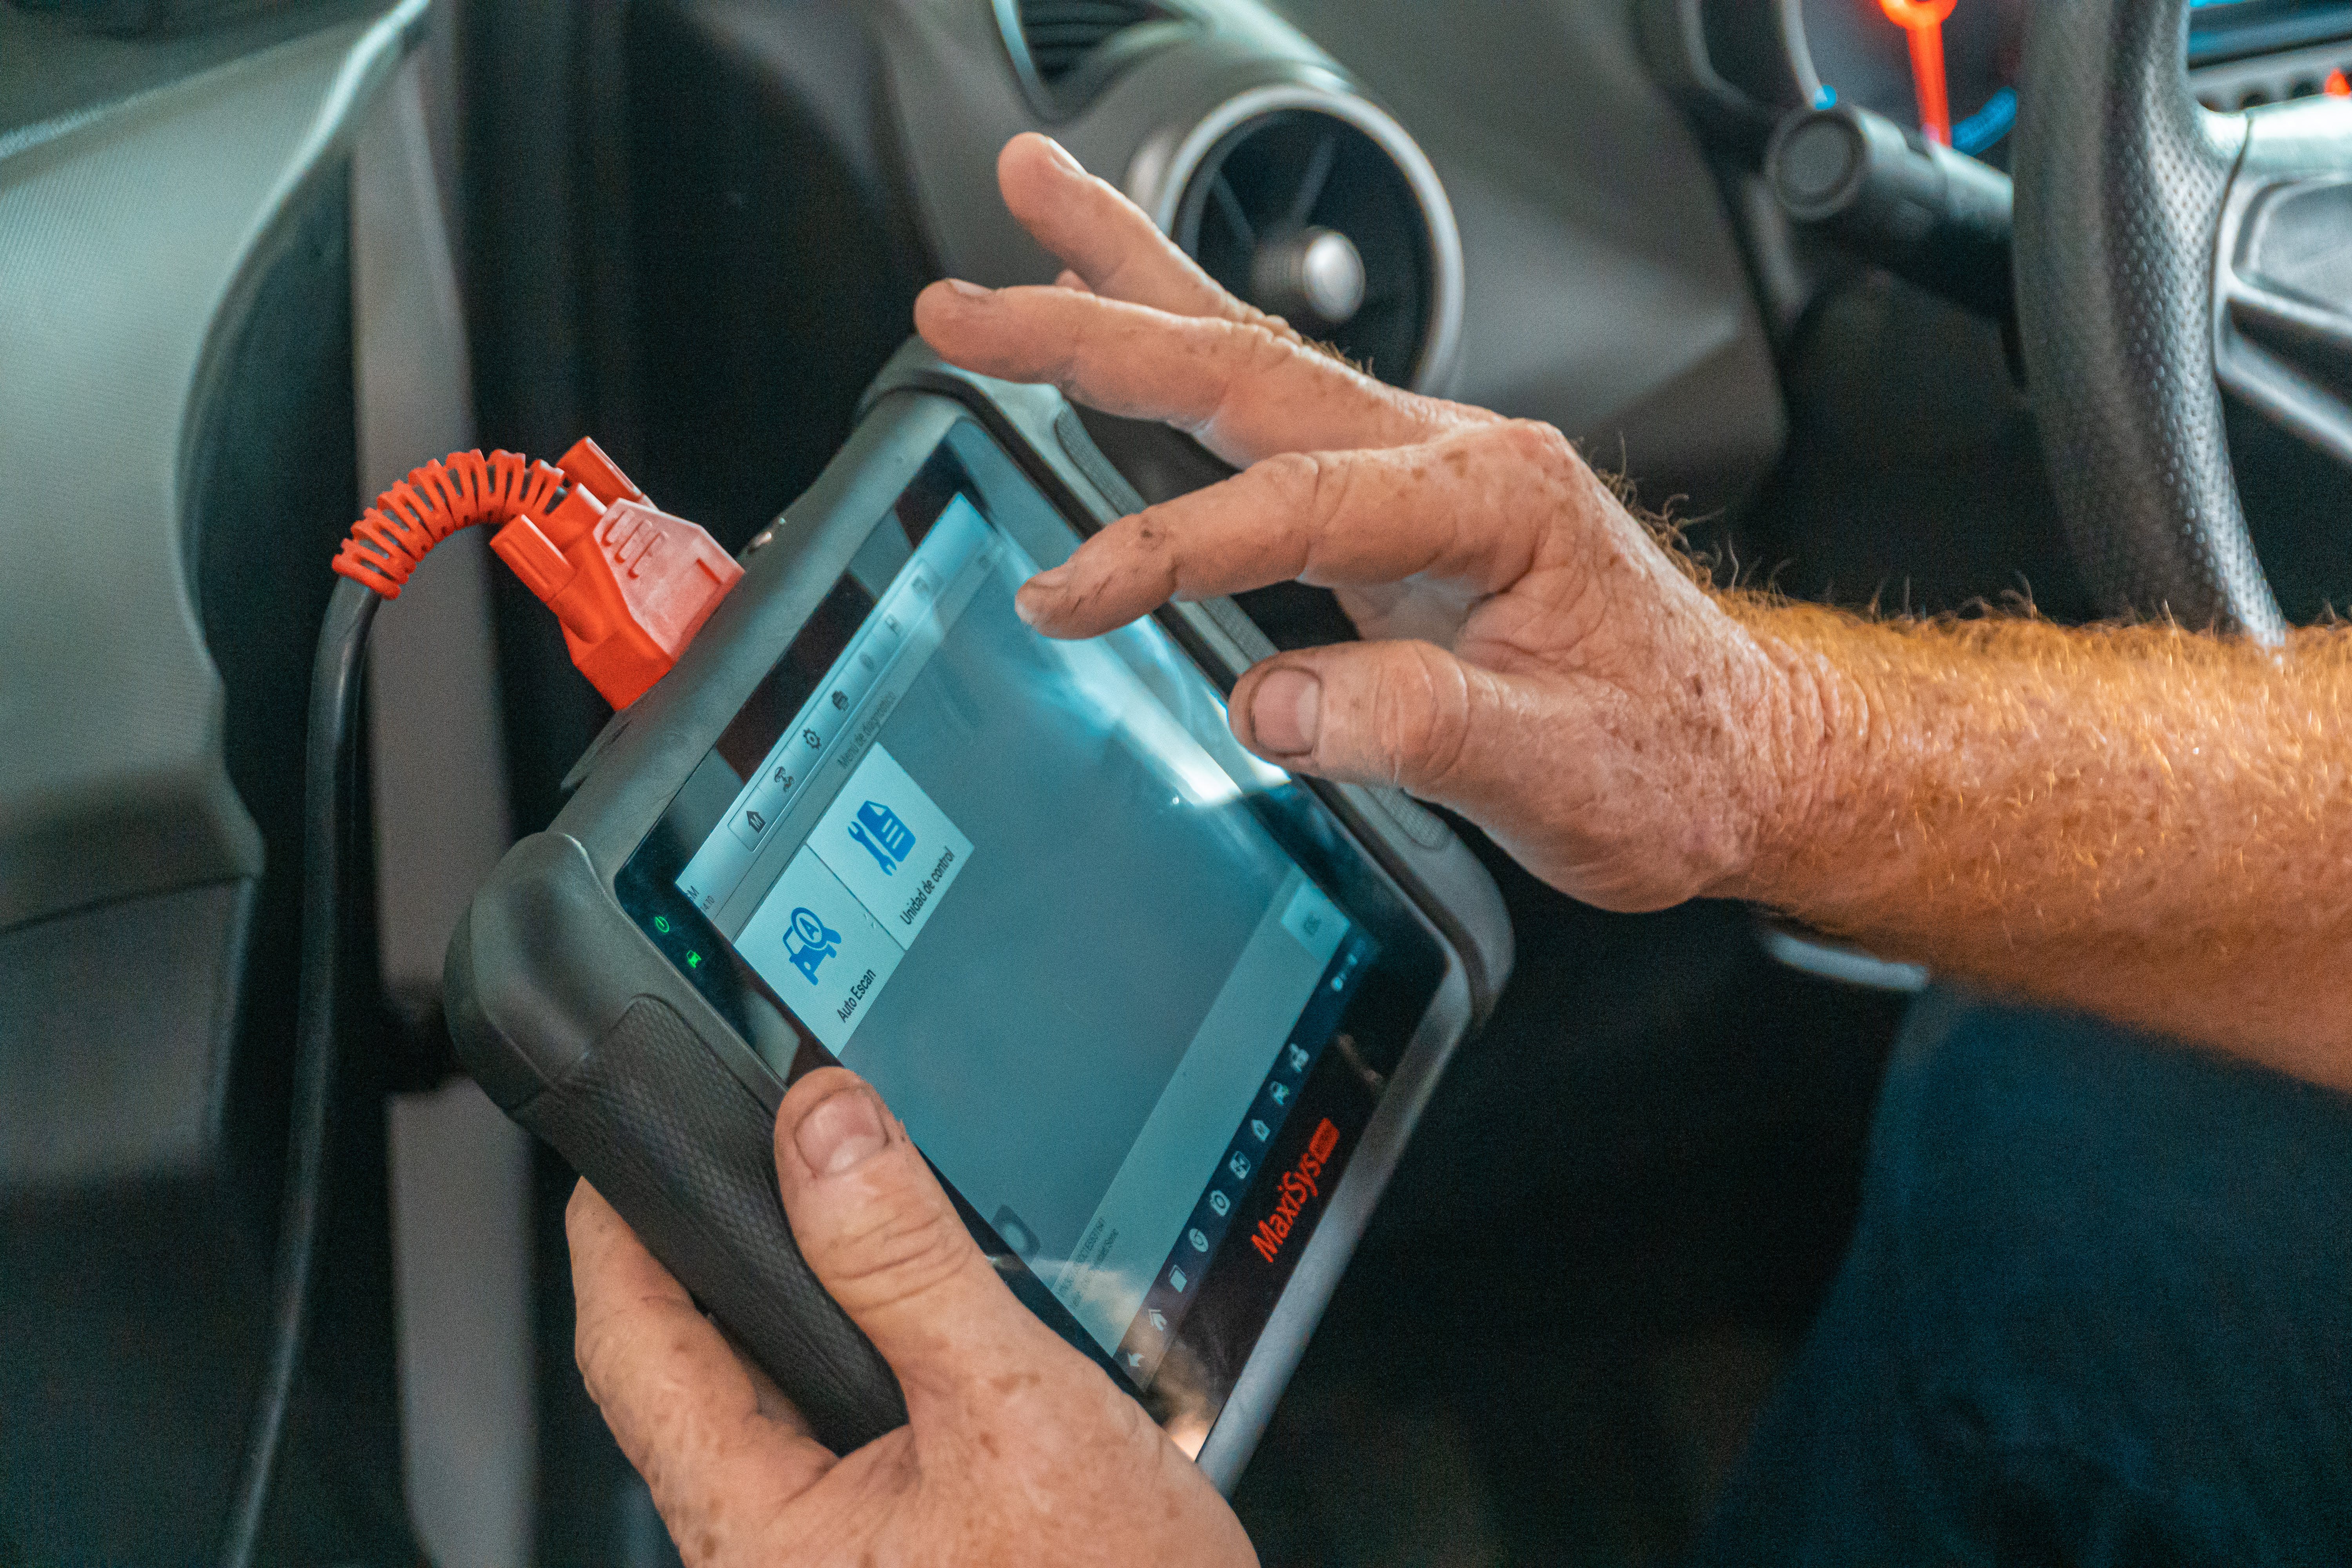 A technician uses a computer diagnostic tool on a vehicle